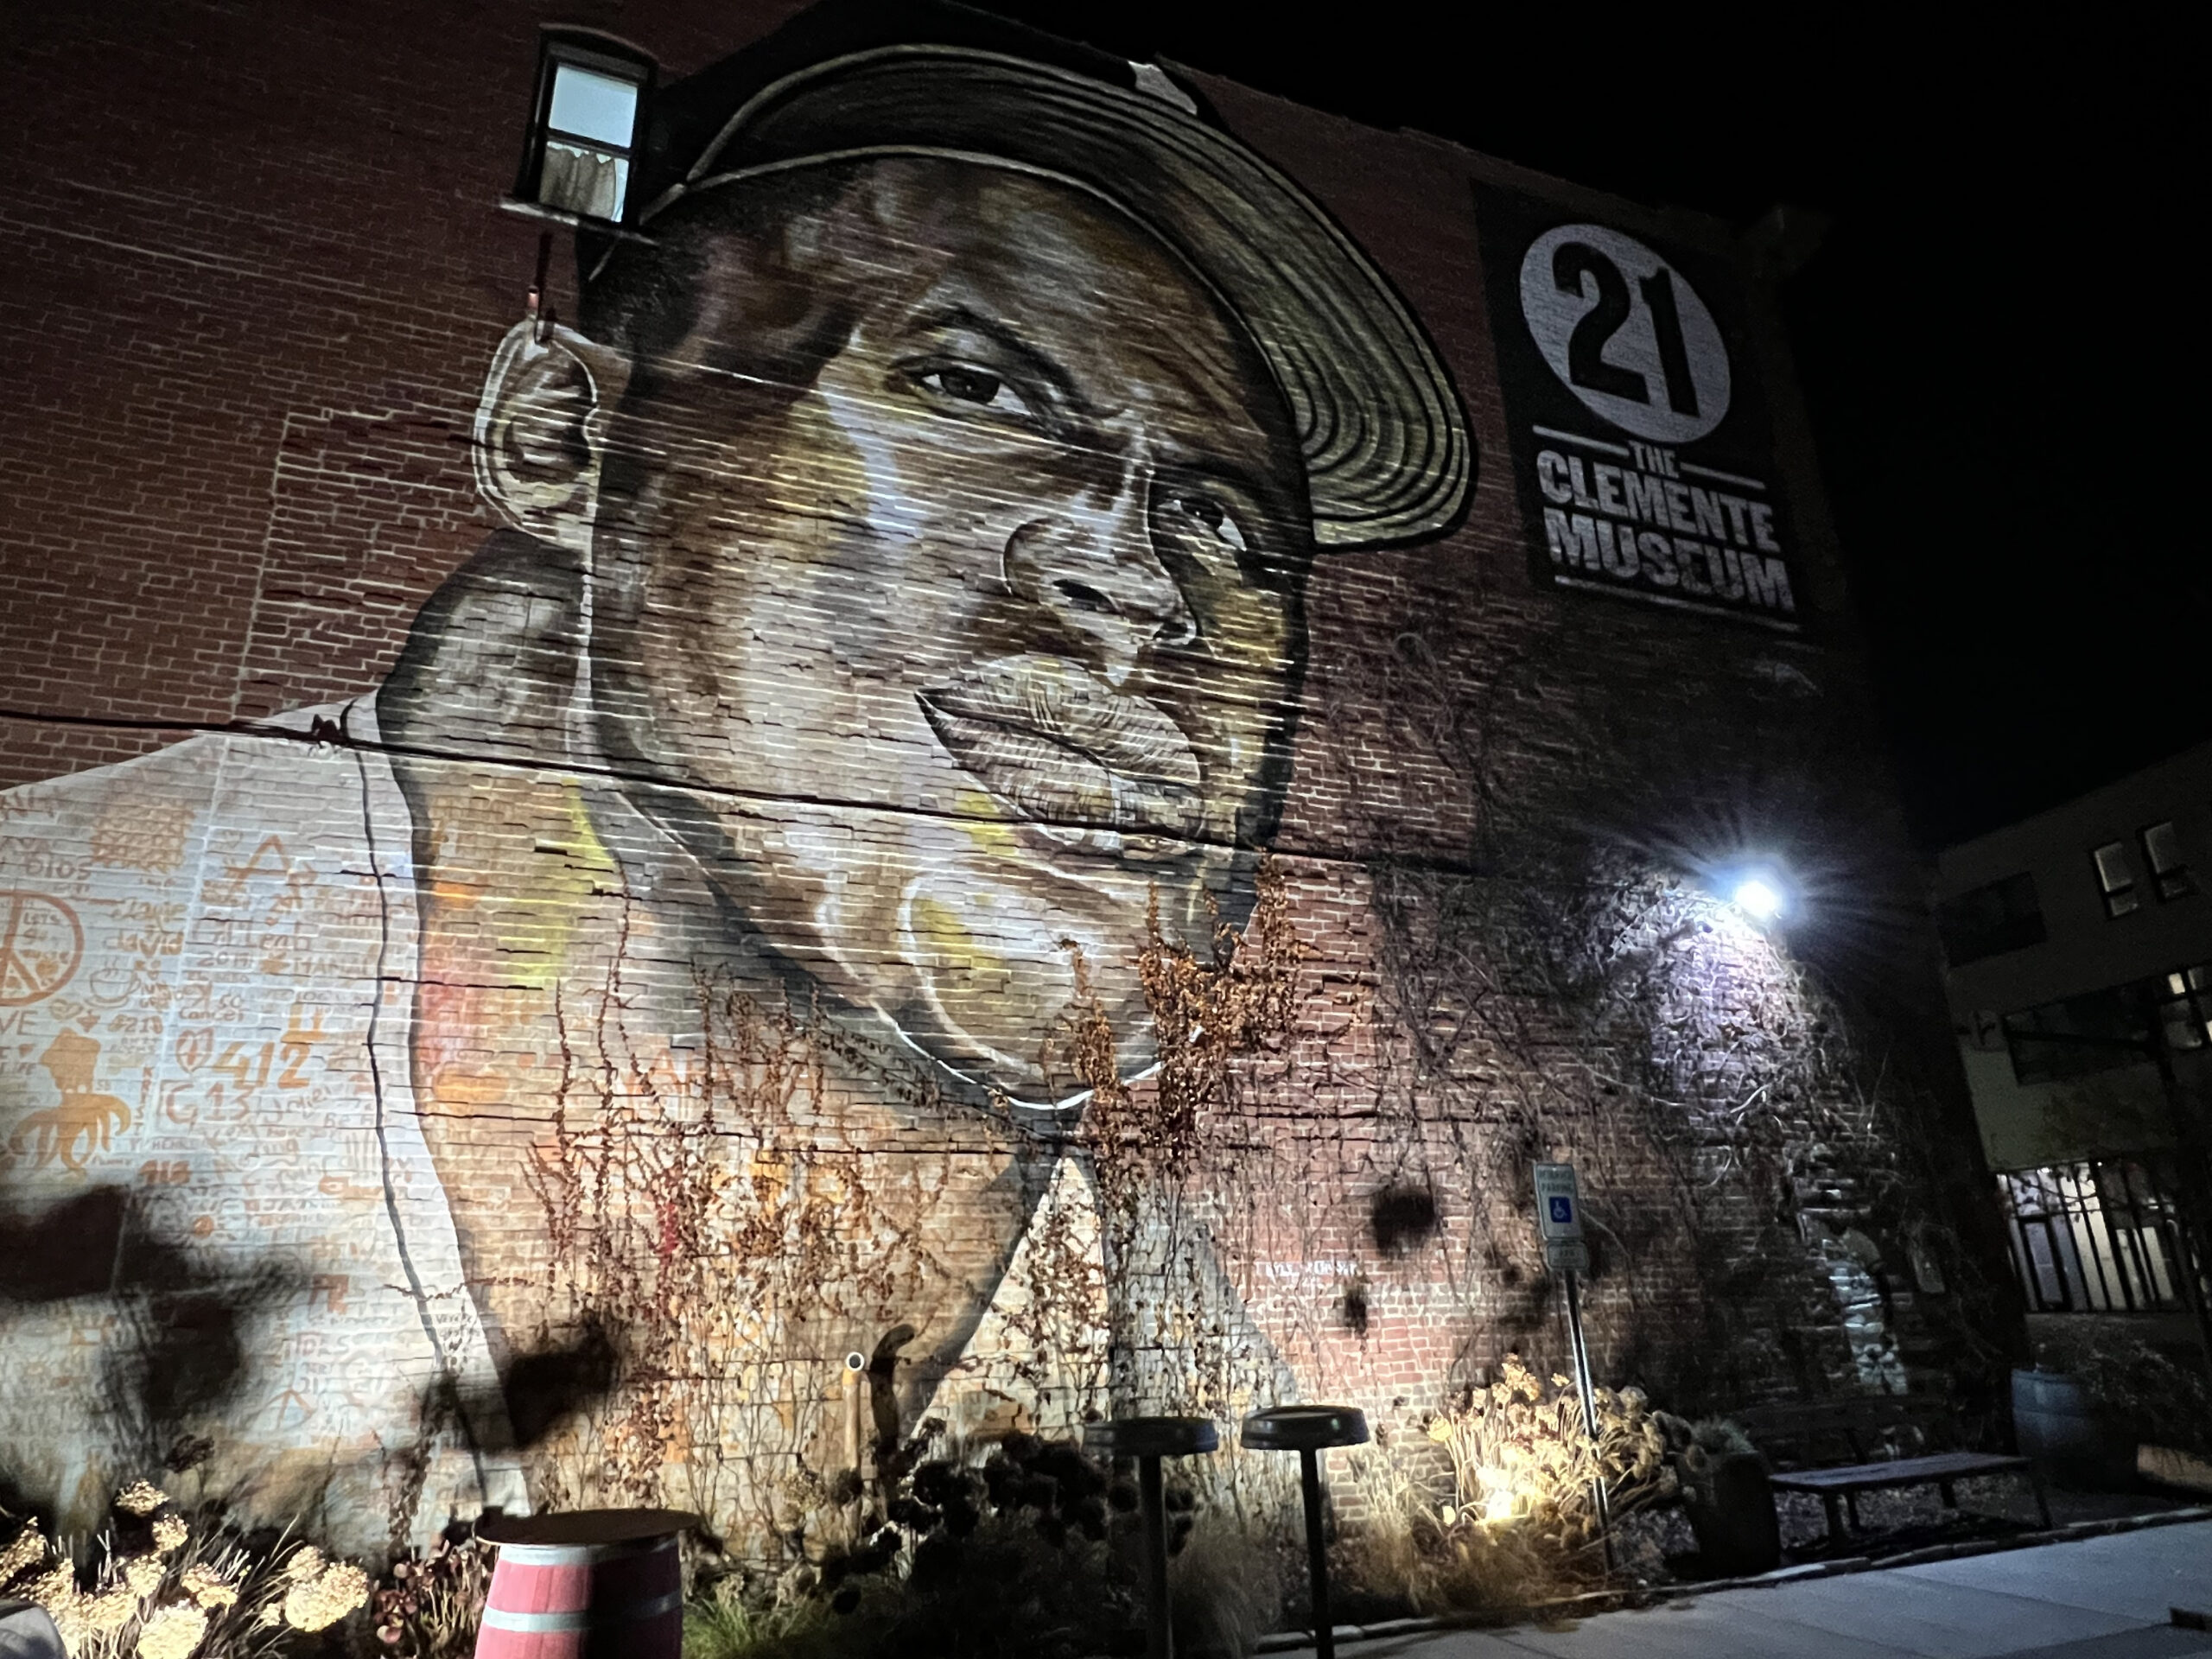 A photo of the outside of the Clemente Museum, which features a mural painting of Roberto Clemente.